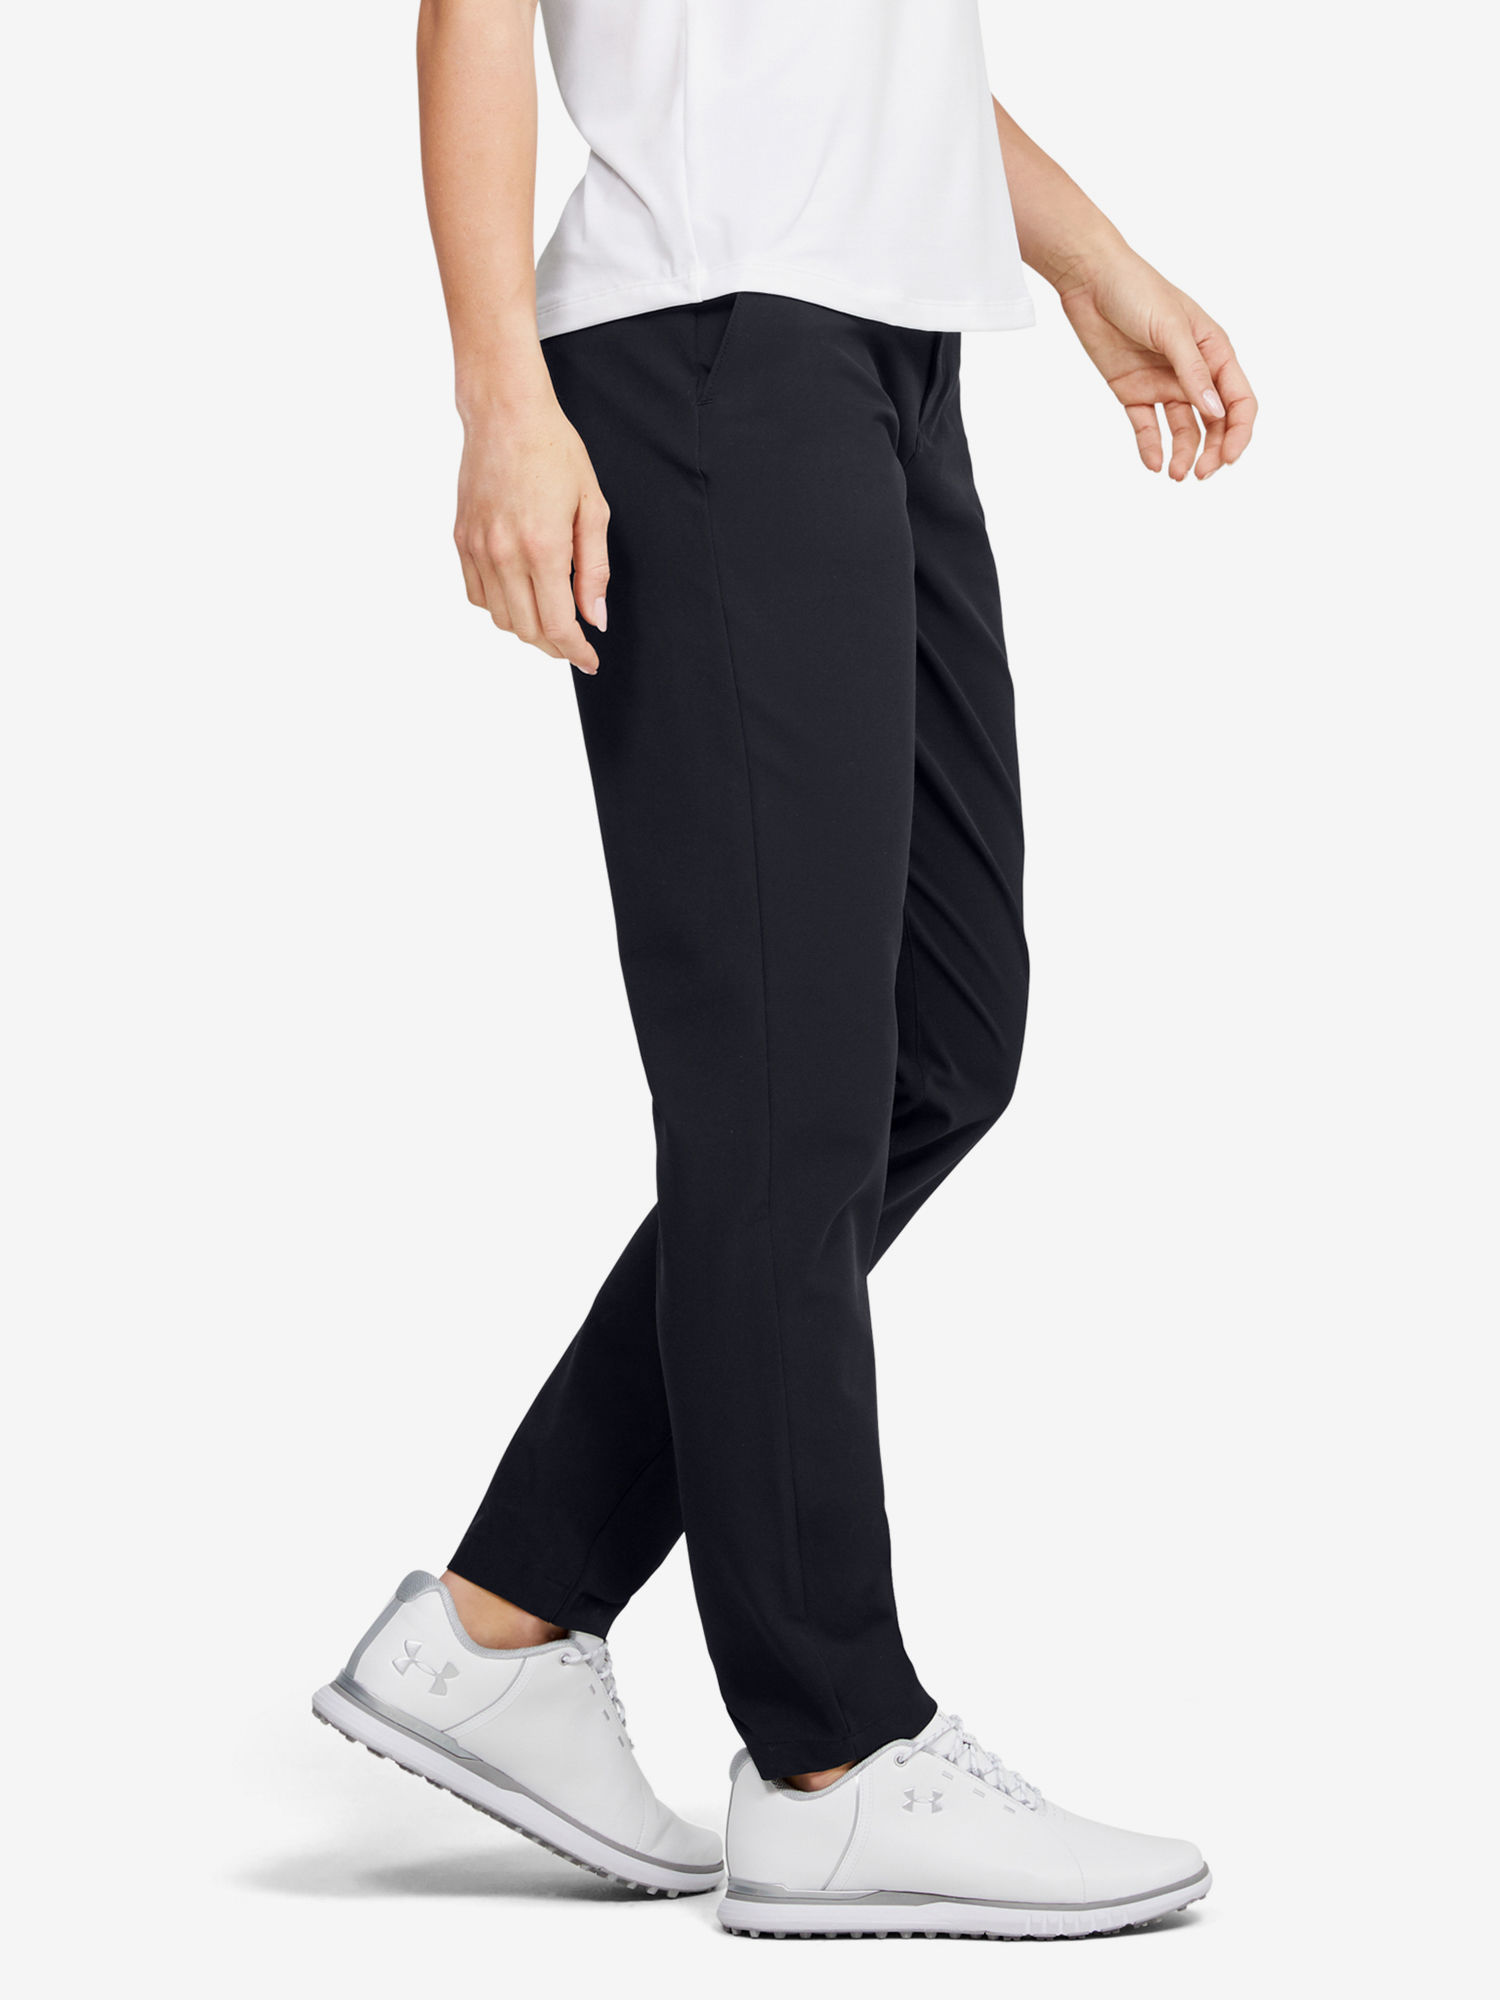 Nohavice Under Armour Links Pant-BLK (3)